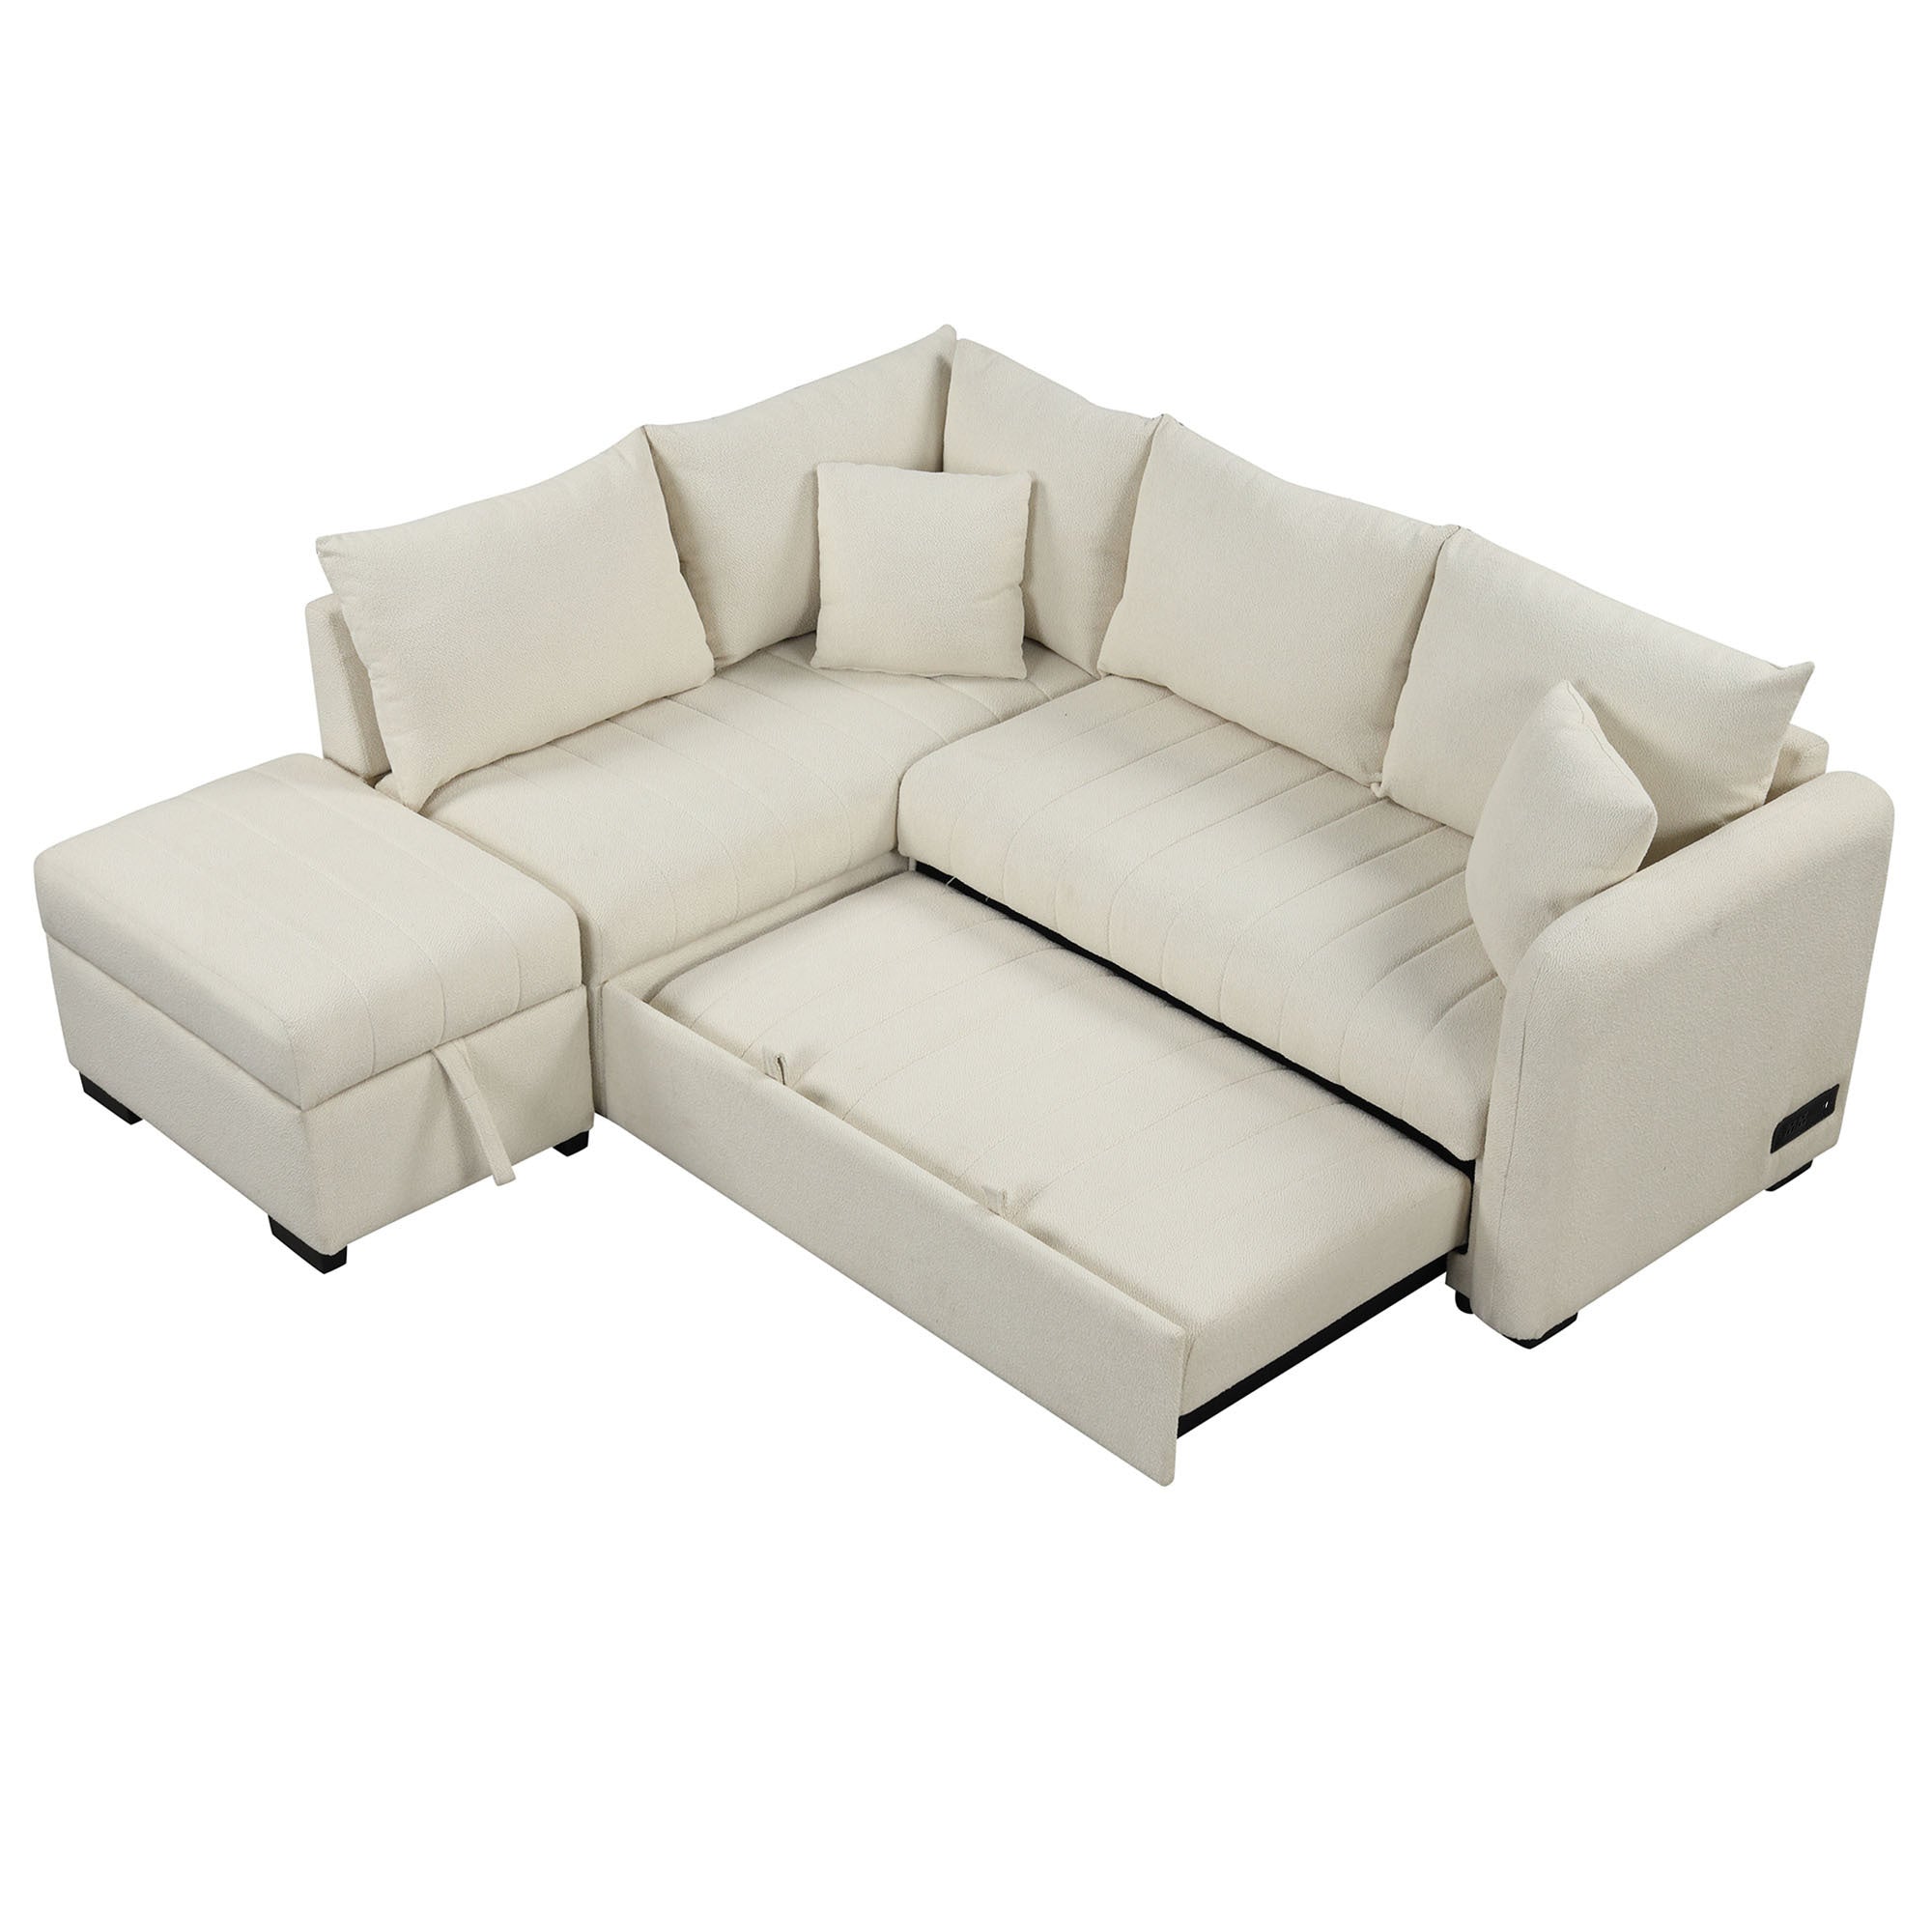 L-Shaped Sectional Sofa Bed w/ Storage Ottoman - Beige